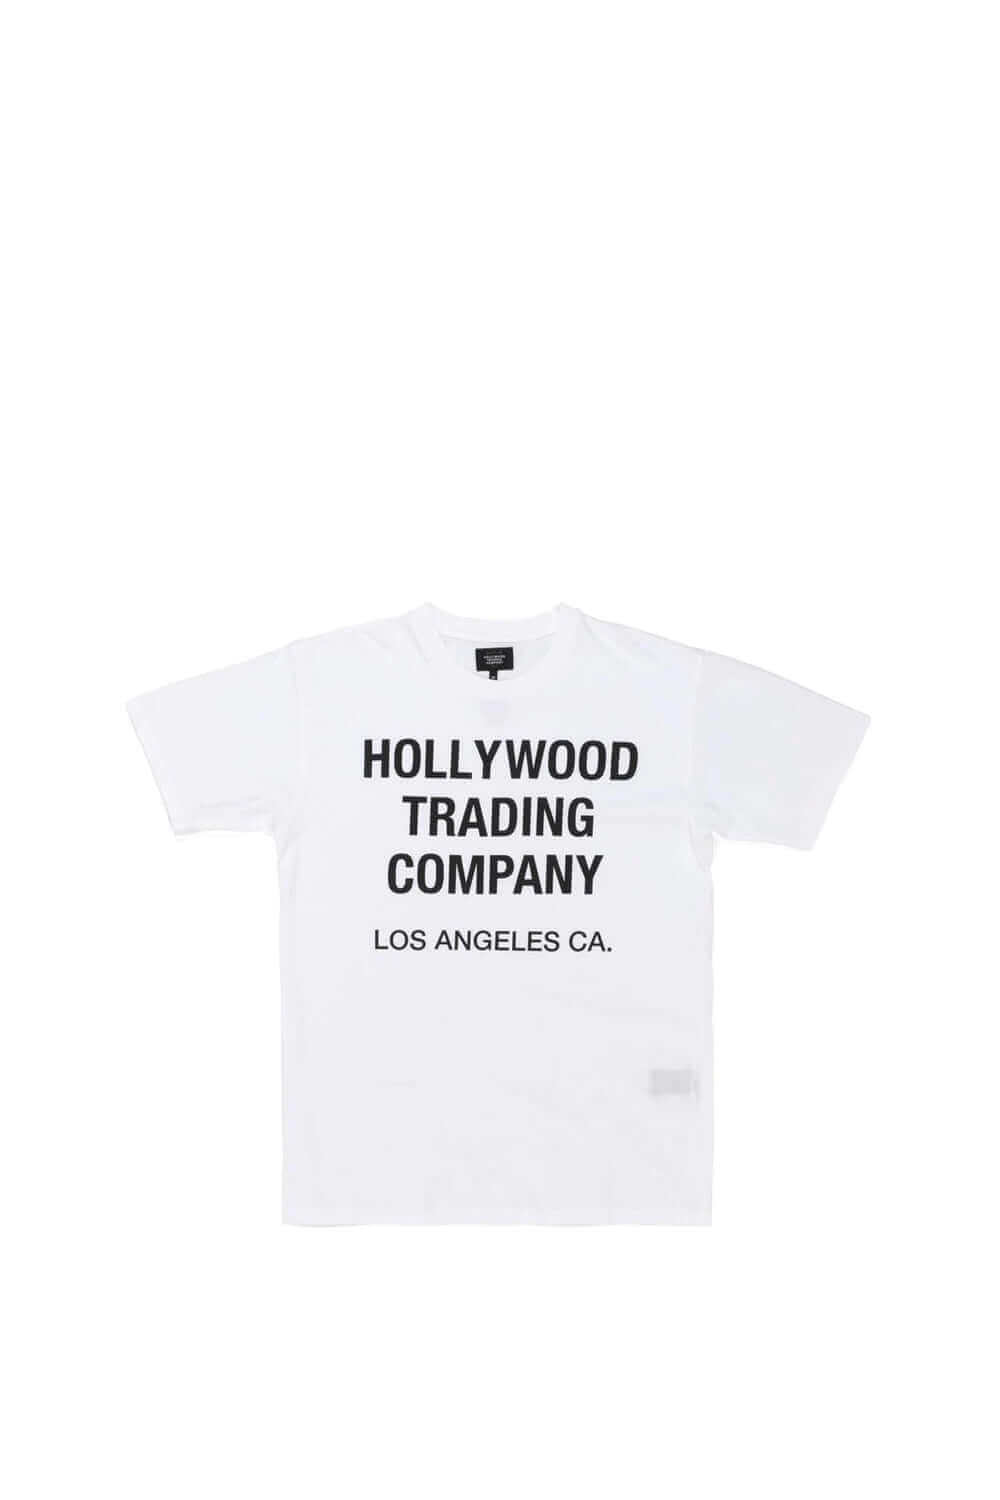 HOLLYWOOD REGULAR T-SHIRT Regular fit t-shirt with ïHollywood Trading CompanyÍ printed on the front. HTC LOS ANGELES